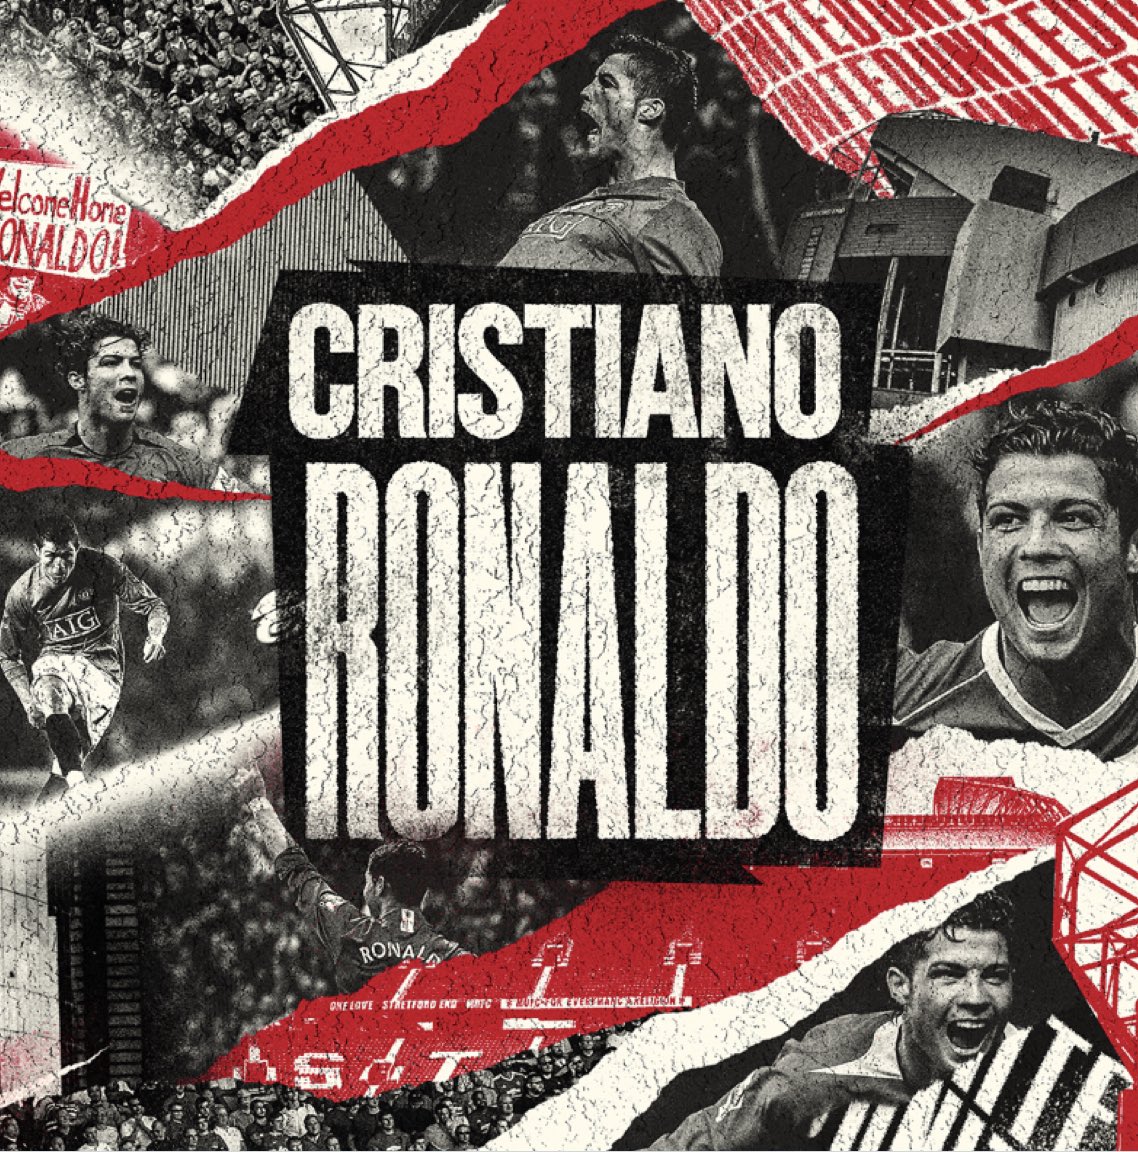 Manchester United Officially Announce Cristiano Ronaldo's Signing